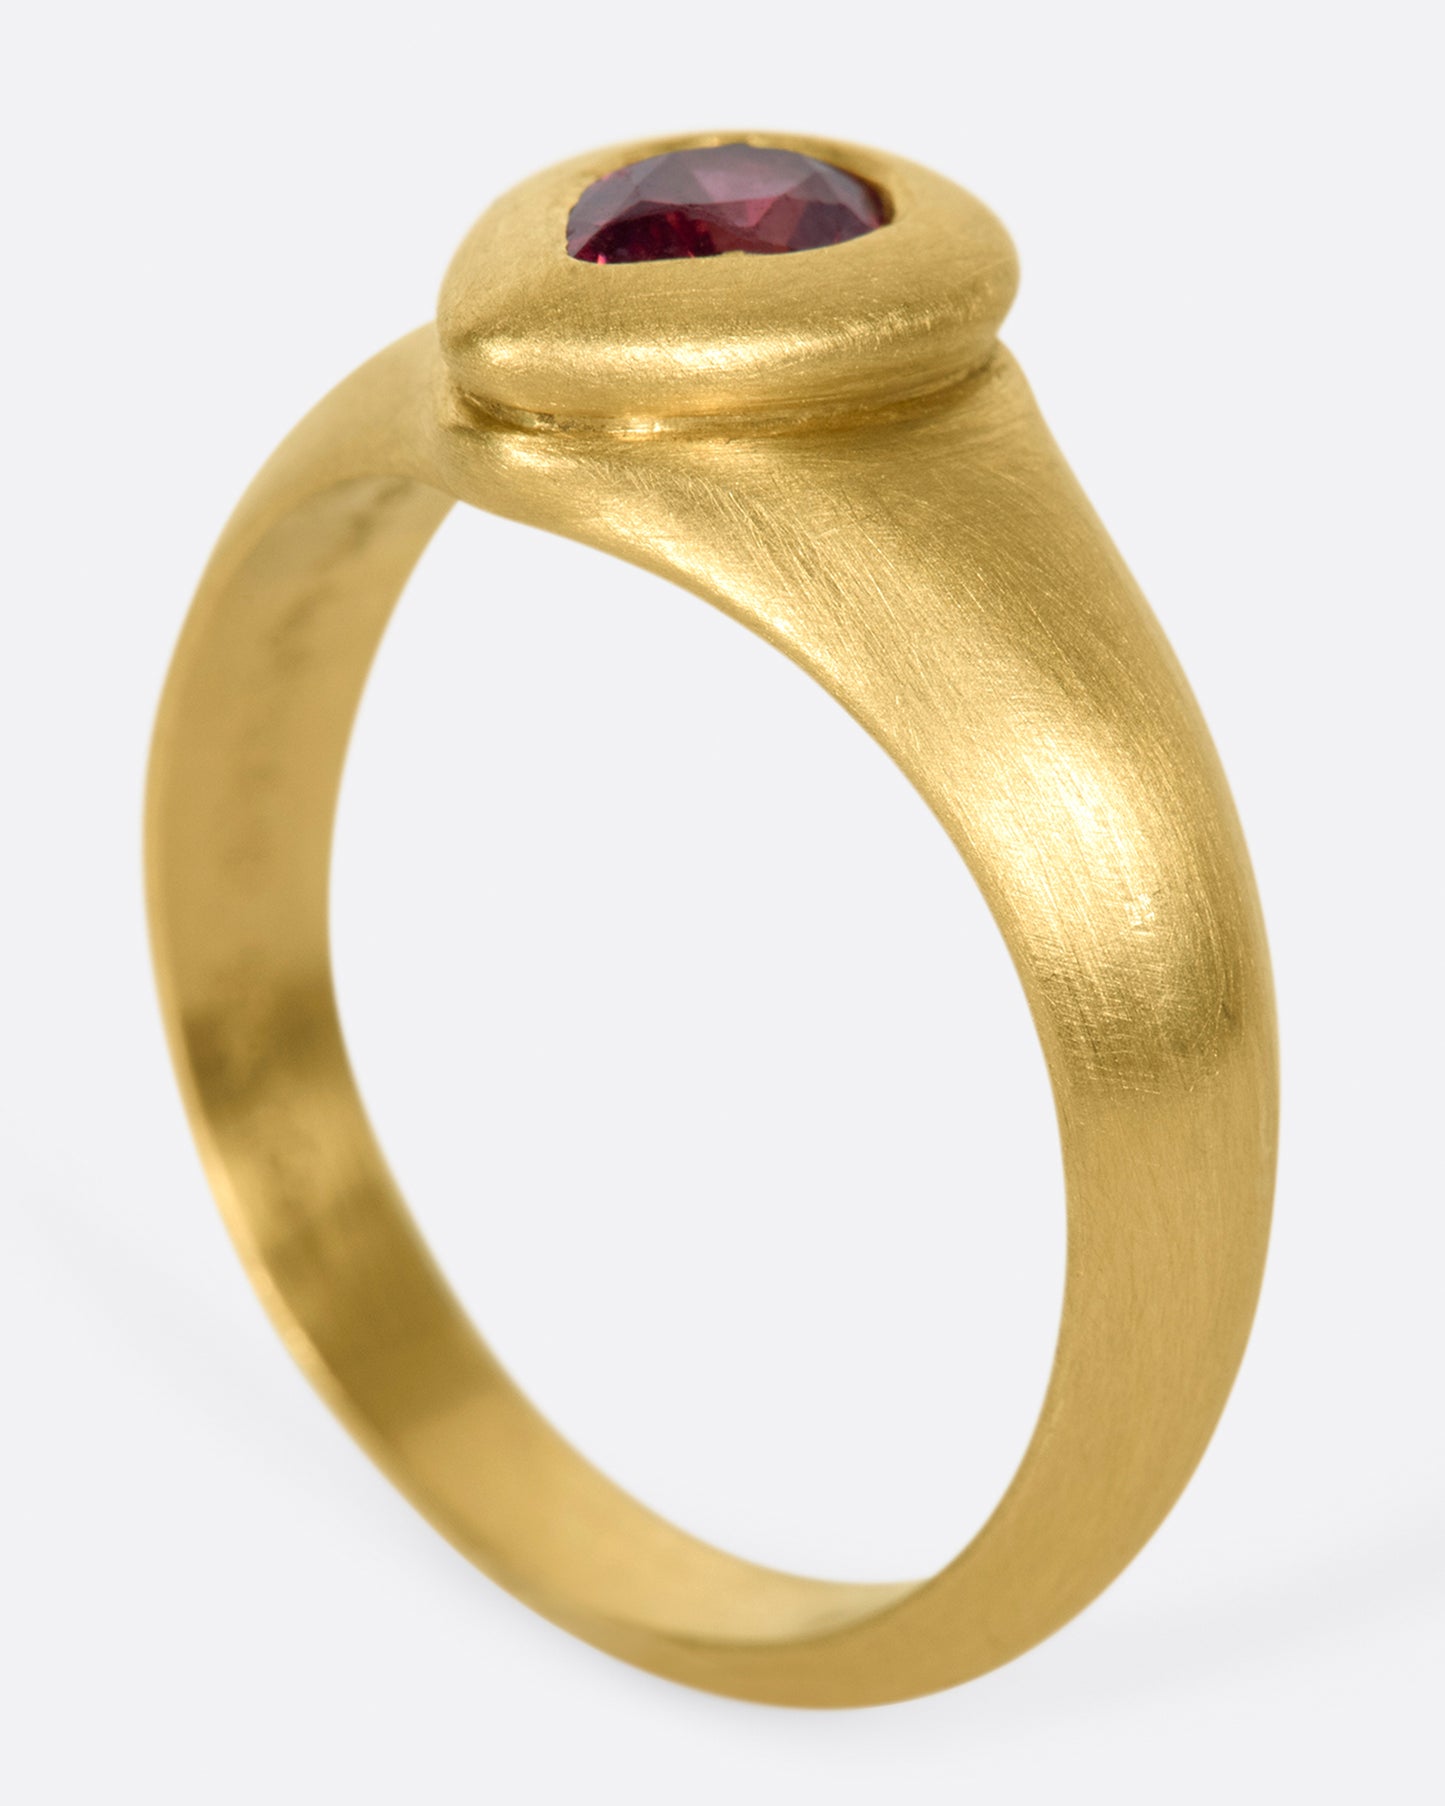 A one of a kind gold ring with a teardrop shaped orangey-pink spinel at its center.